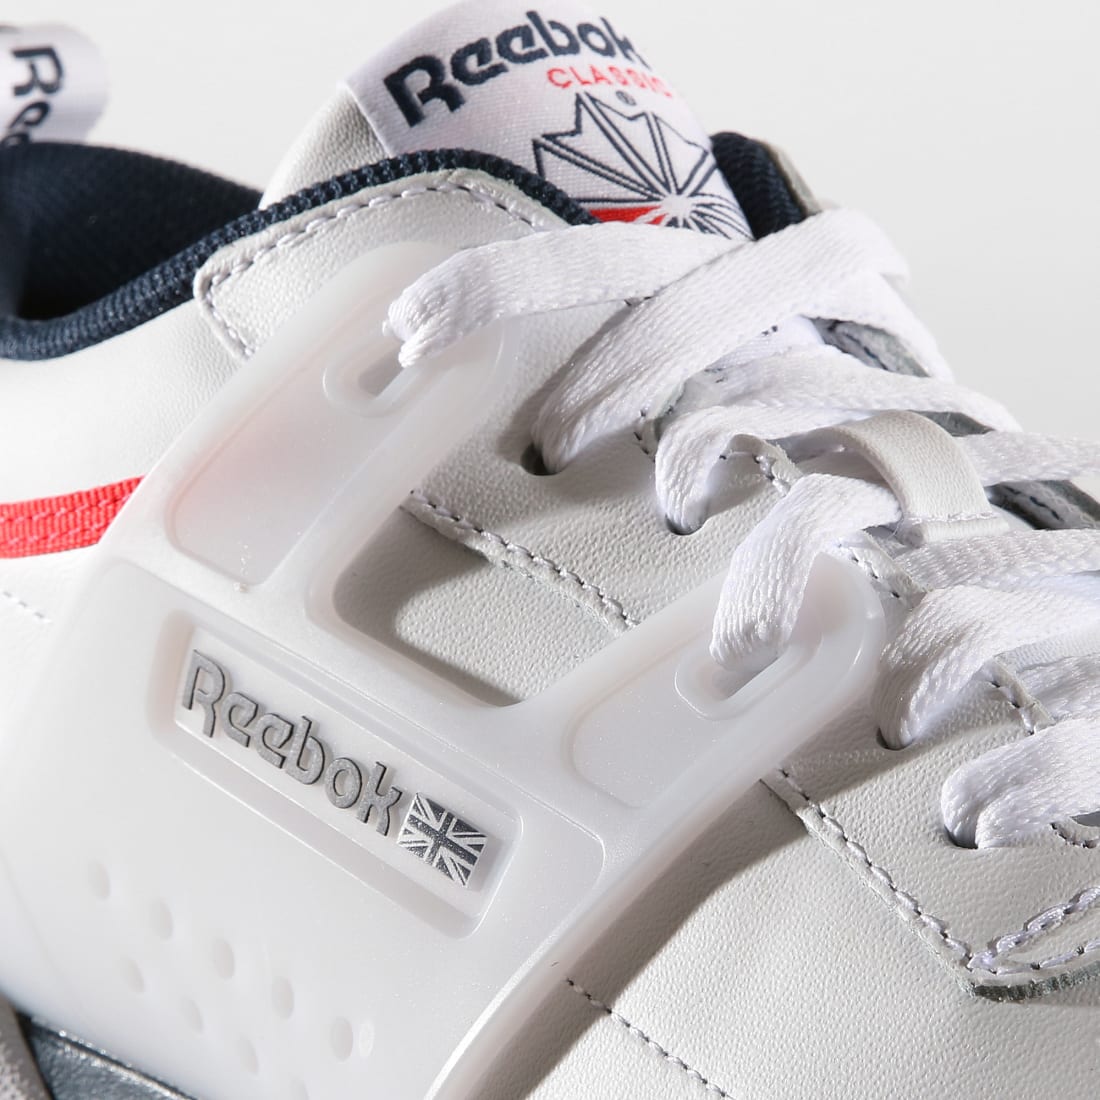 reebok baskets workout advanced low cn4309 white collegiate navy red